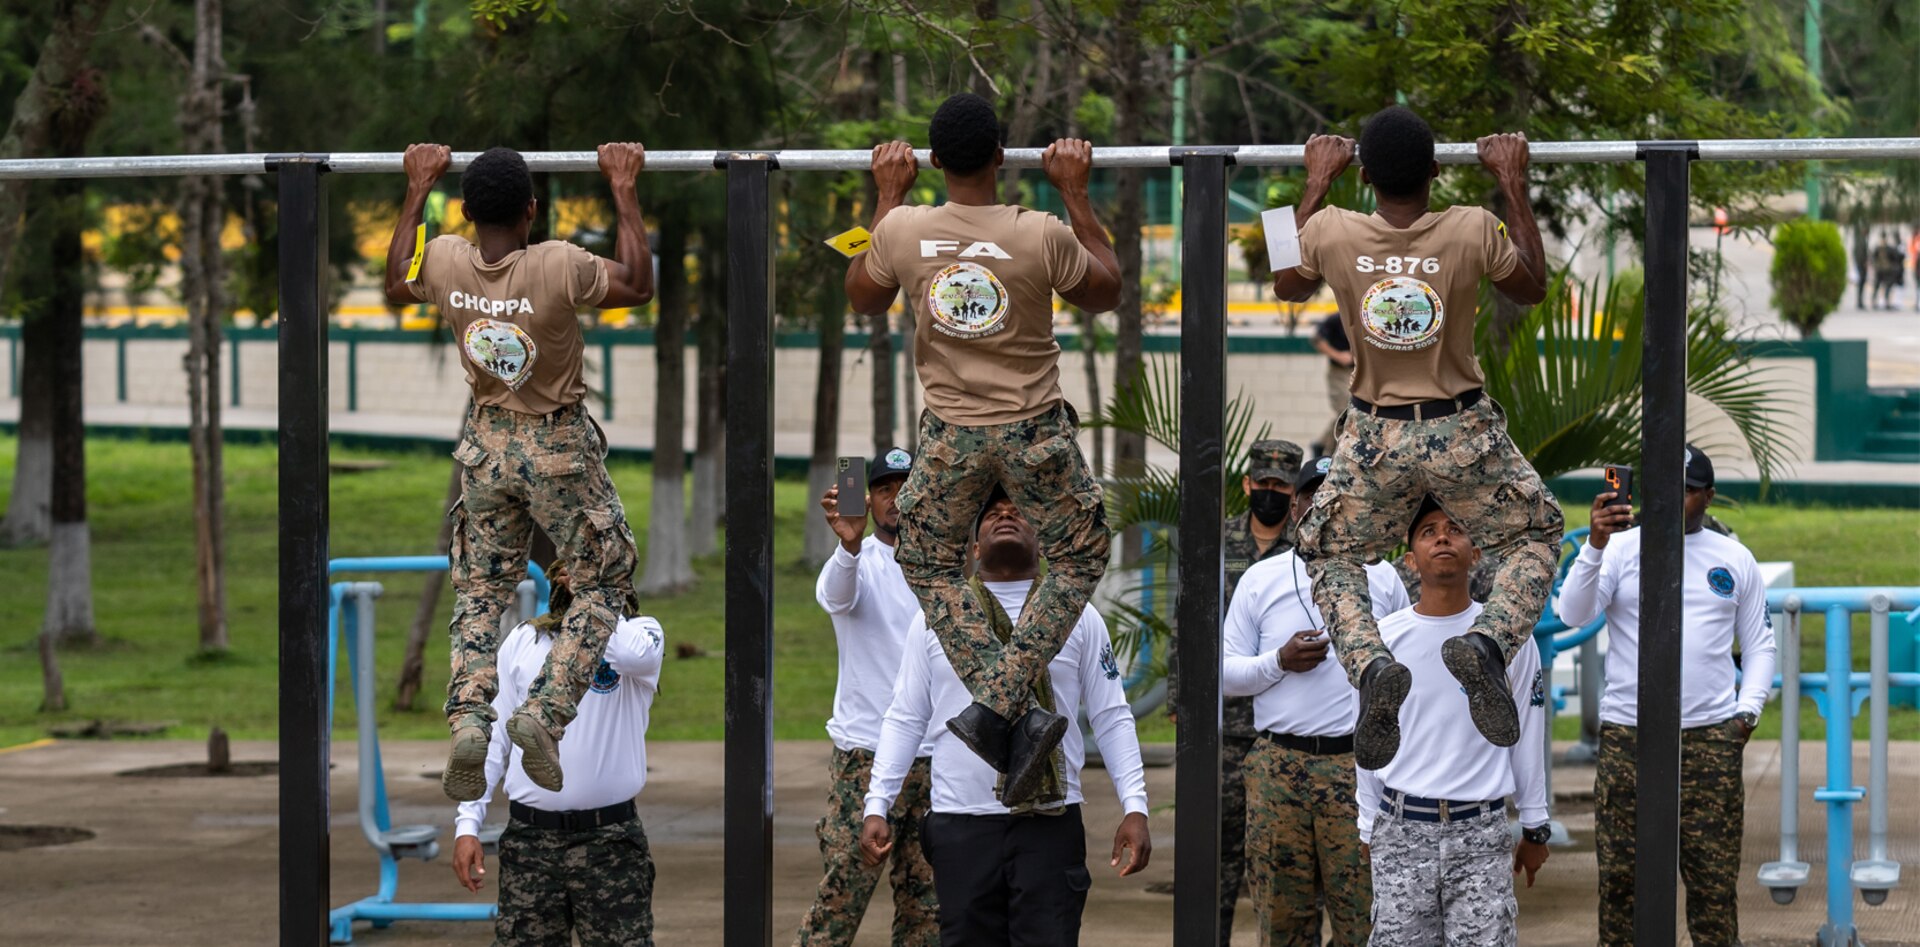 Jamaica team members perform the pullup portion of the Physical Training Test as part of the first event for Fuerzas Comando 2022, on June 13, 2022, in Tegucigalpa, Honduras.